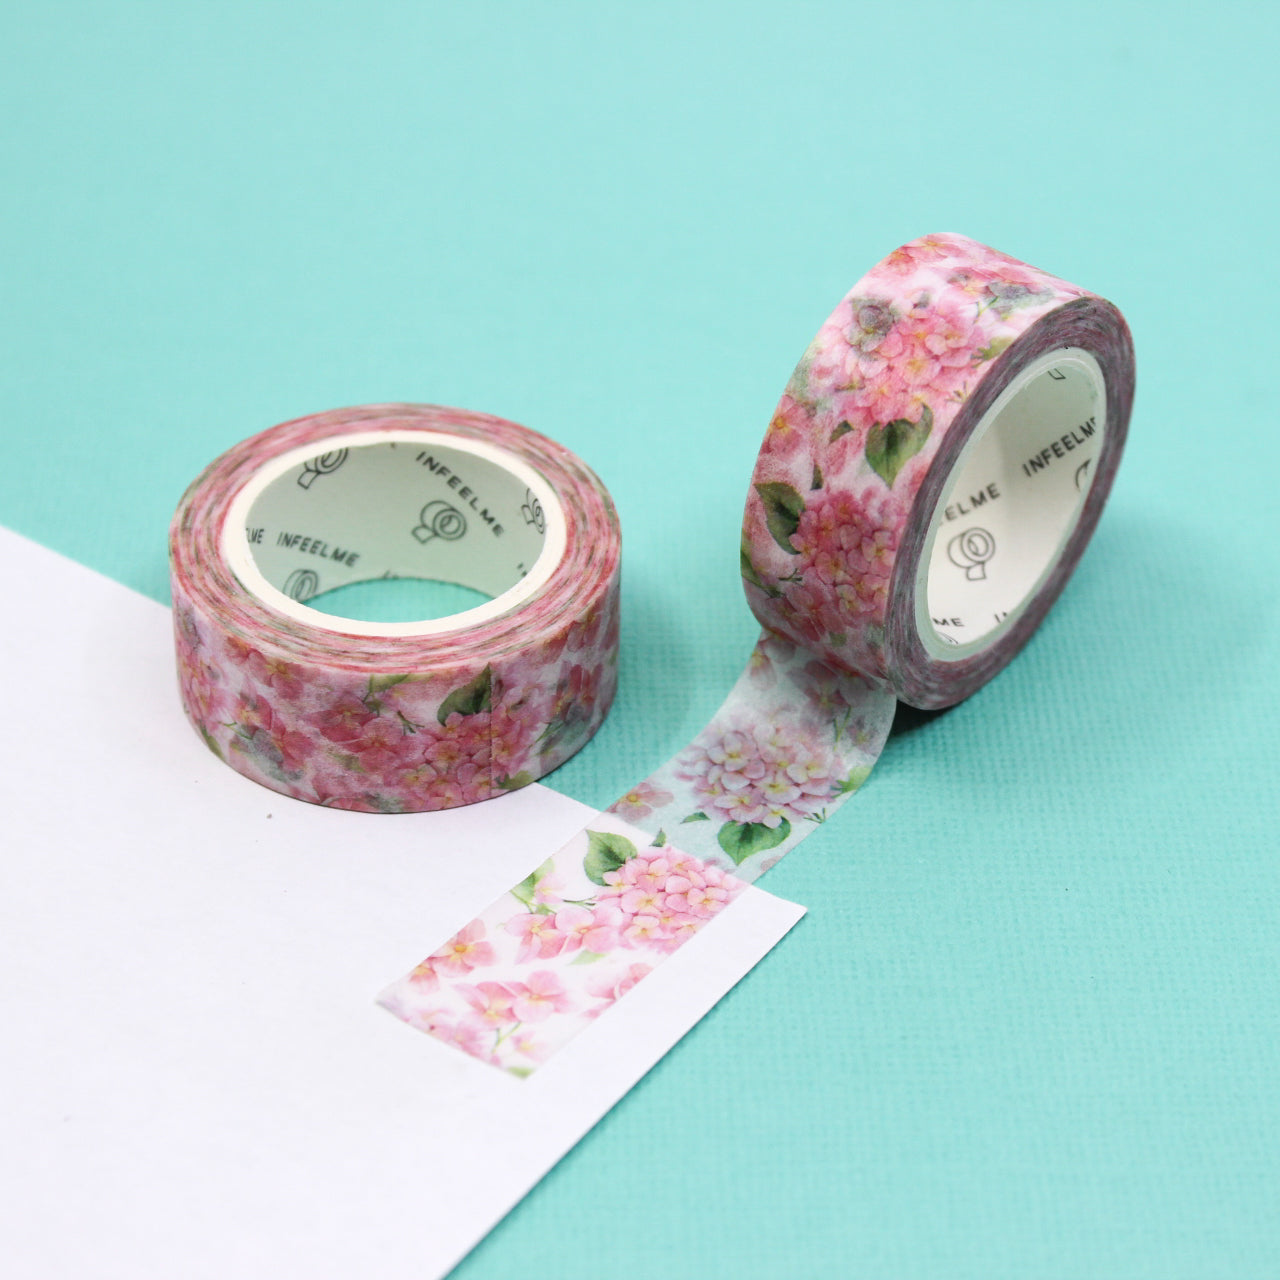 This pretty pink Hydrangea flower tape is a vibrant blooming floral pattern that is perfect for your BUJO and craft projects. Spring is in the air with this gorgeous tape. This tape is sold at BBB Supplies Craft Shop.